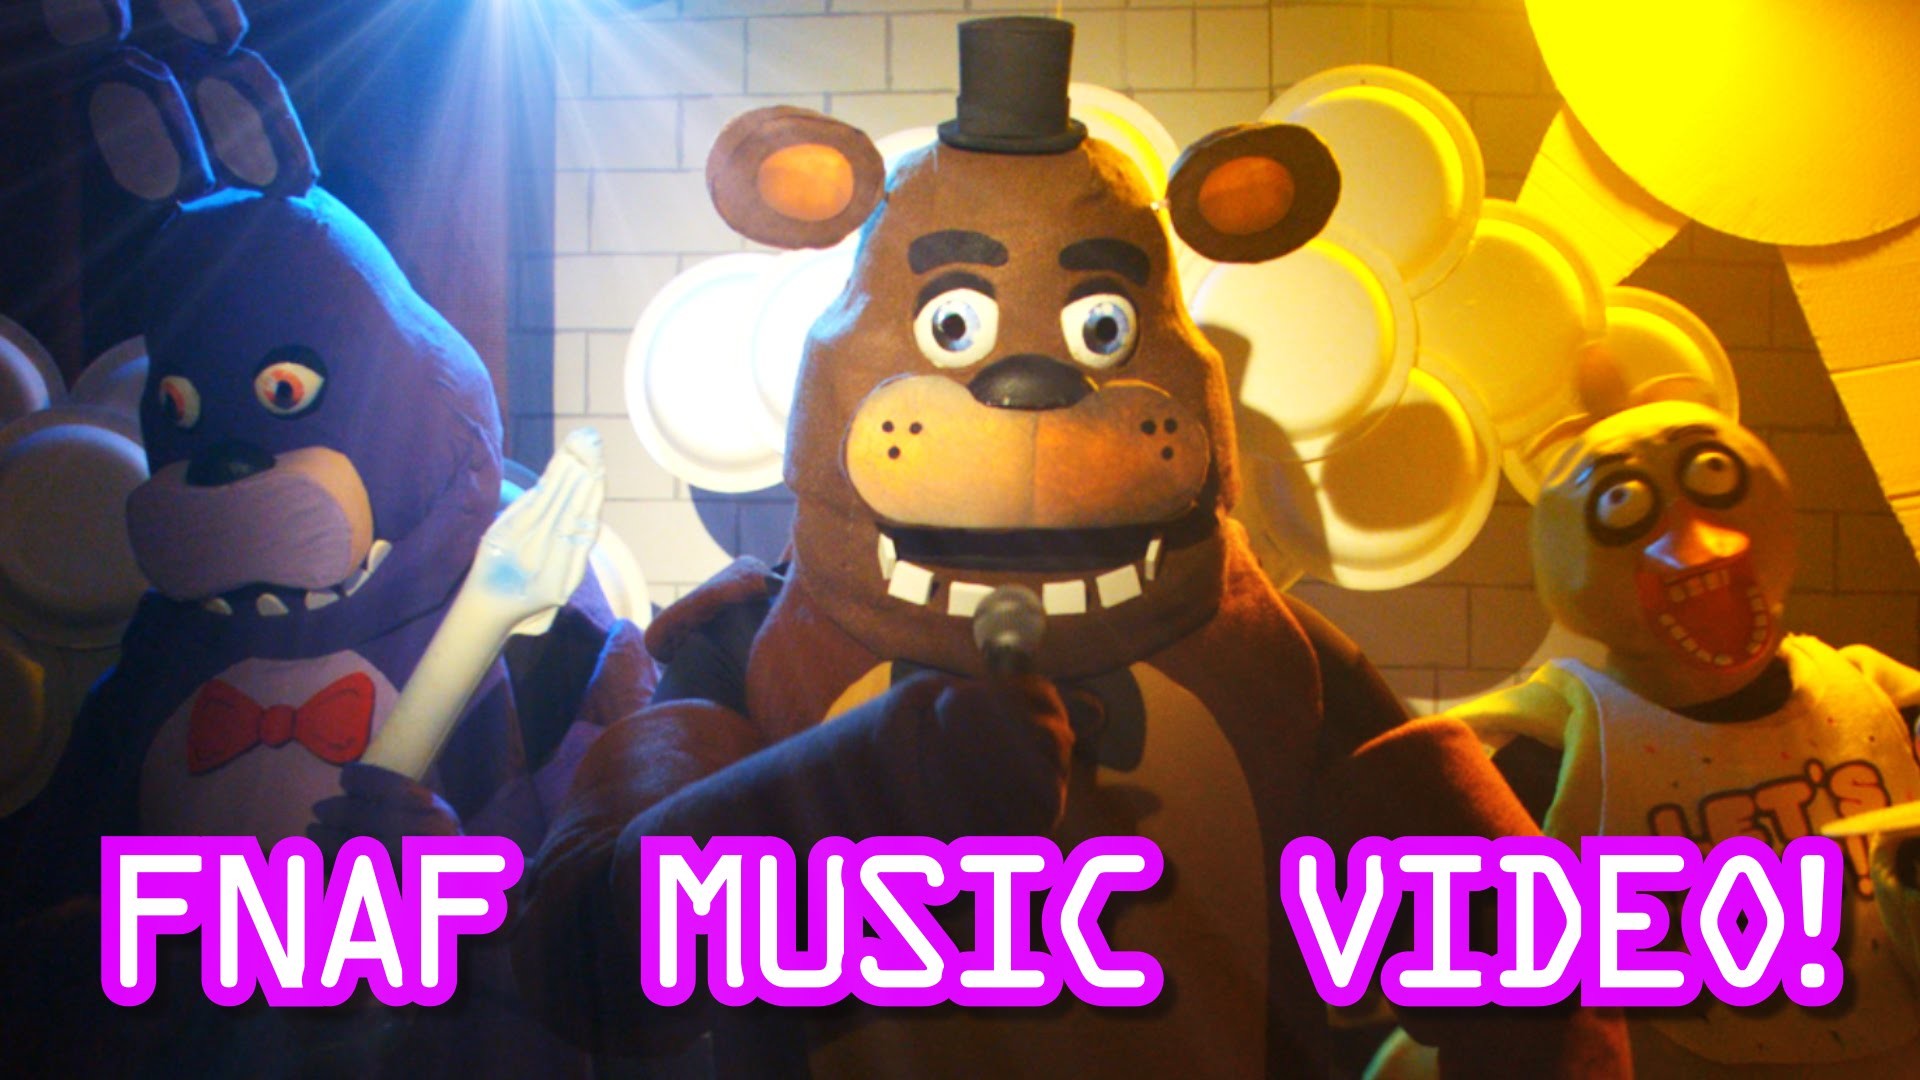 Five Nights At Freddys Live Action Music Video – FNAF Song for kids – YouTube